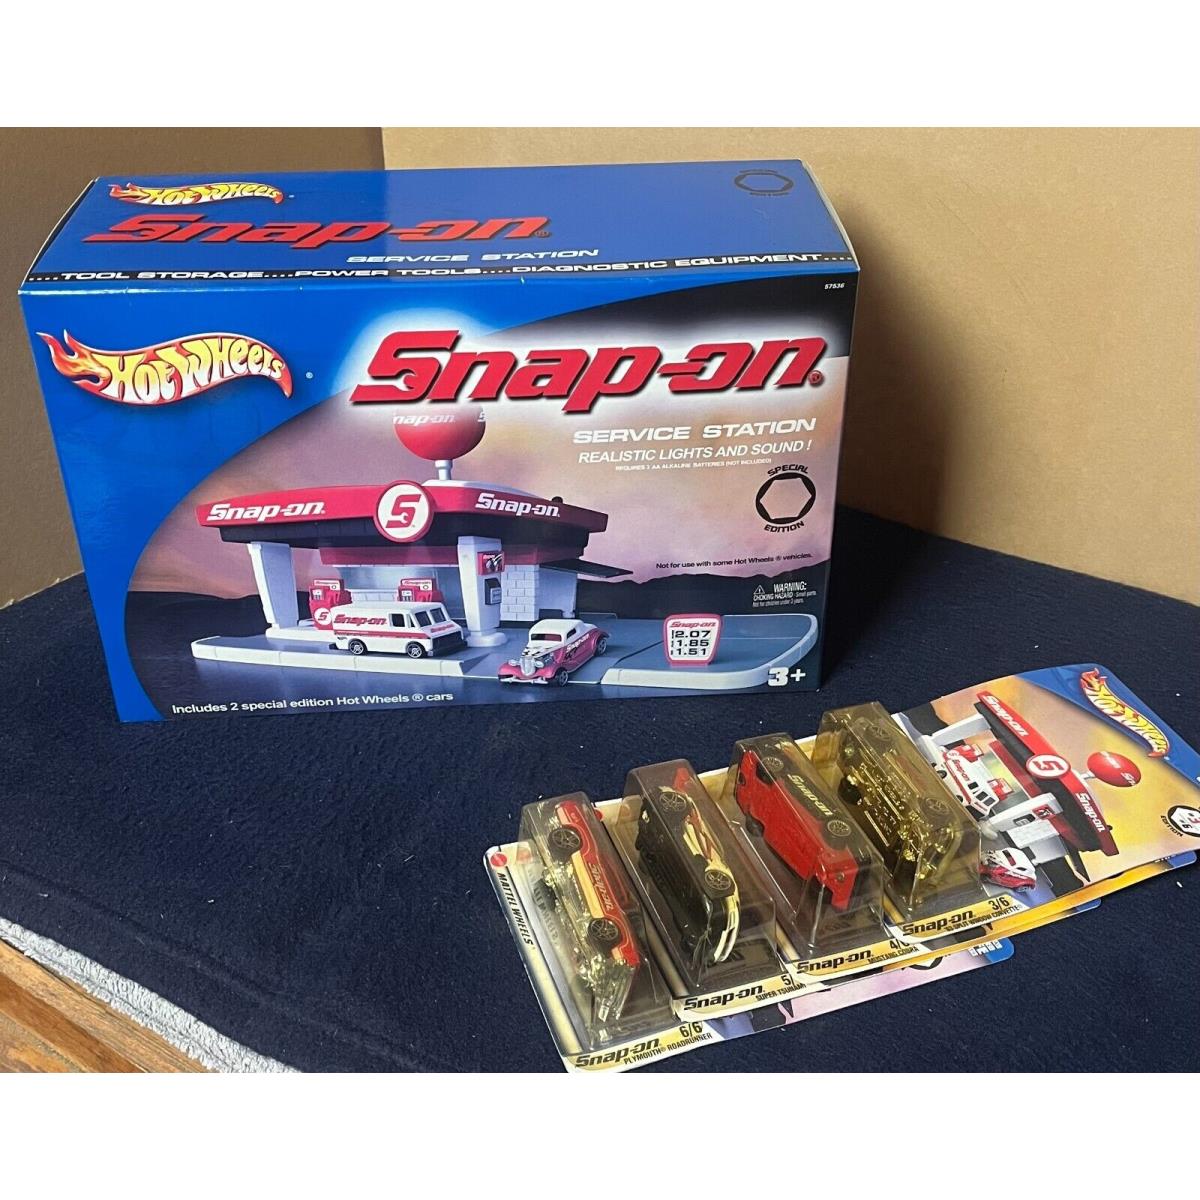 Hot Wheels Snap-on Service Station Play Set 57536 with Cars 3-6